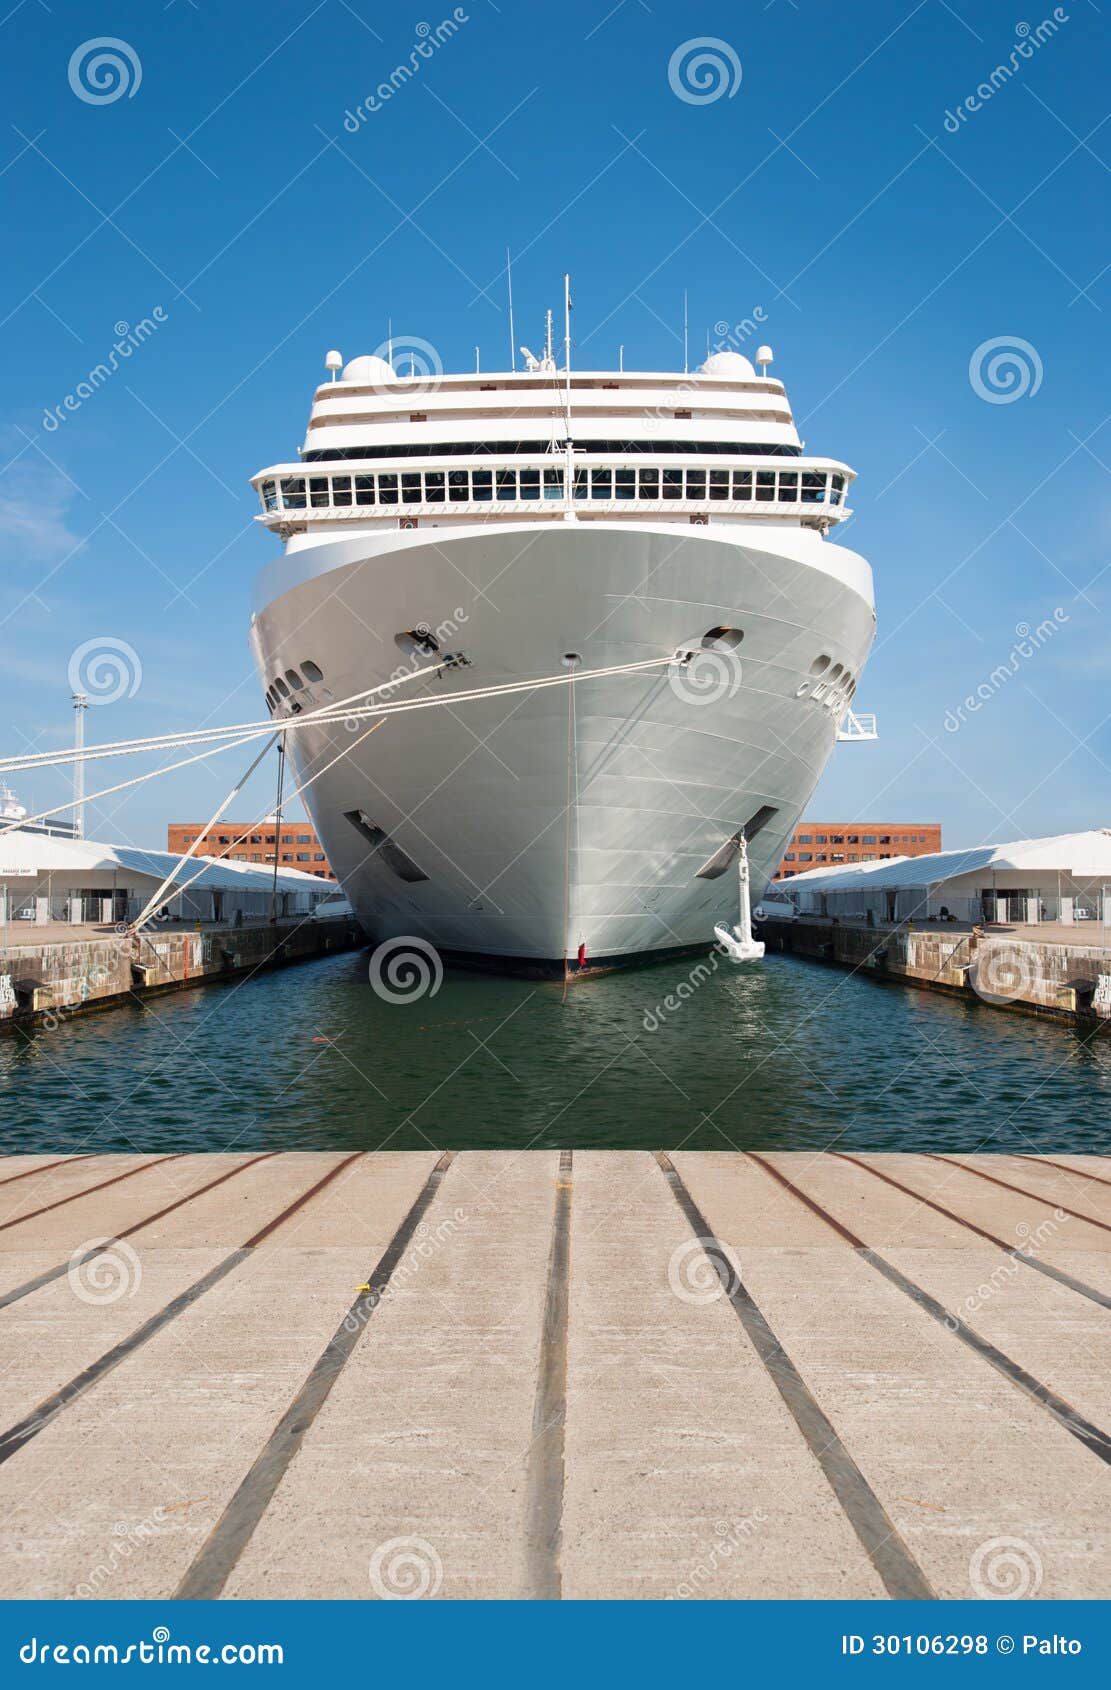 cruise ship standing at the berth